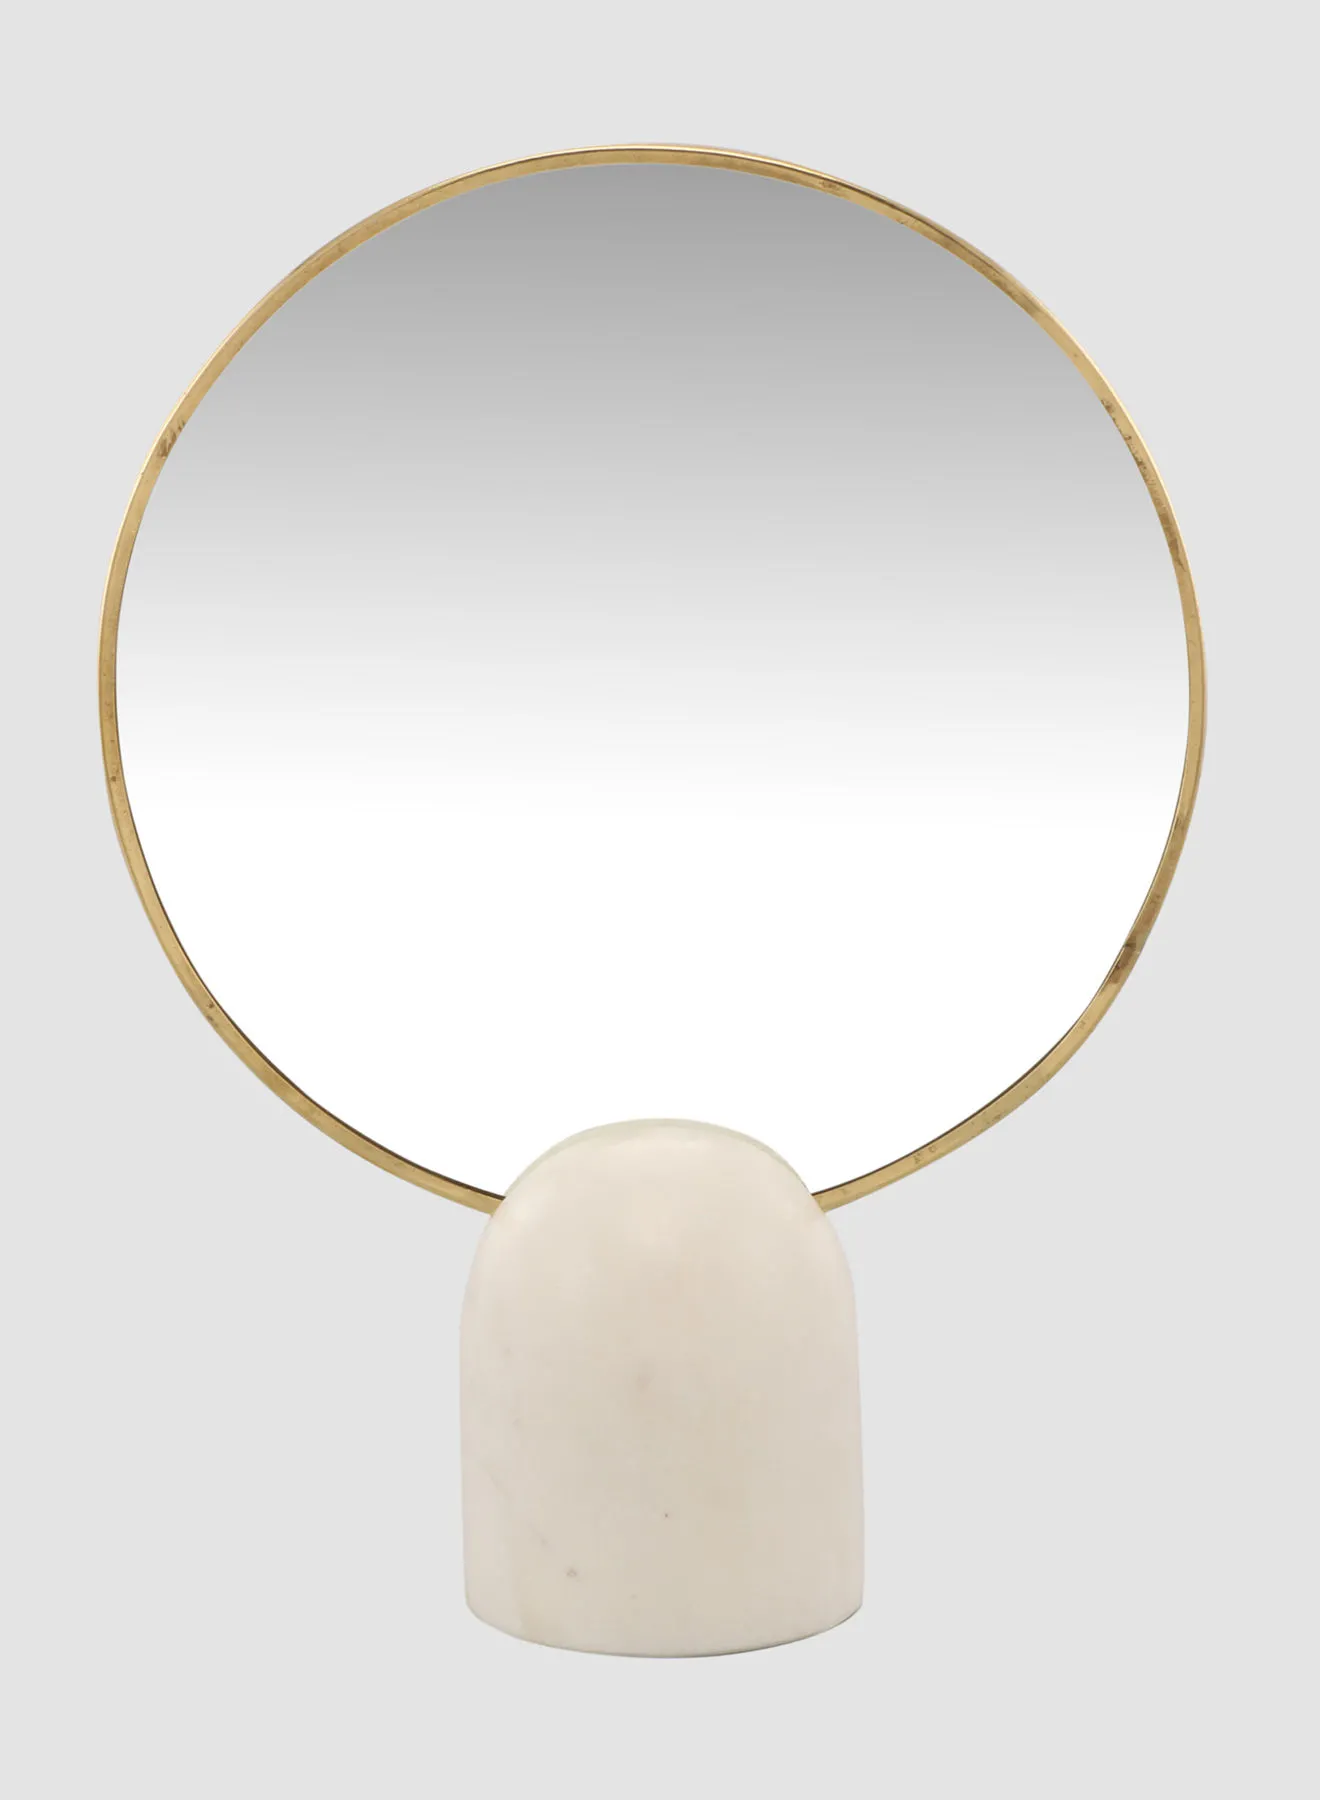 Switch Modern Design Table Mirror Unique Luxury Quality Material For The Perfect Stylish Home CCM12732 Gold L21 x H28centimeter